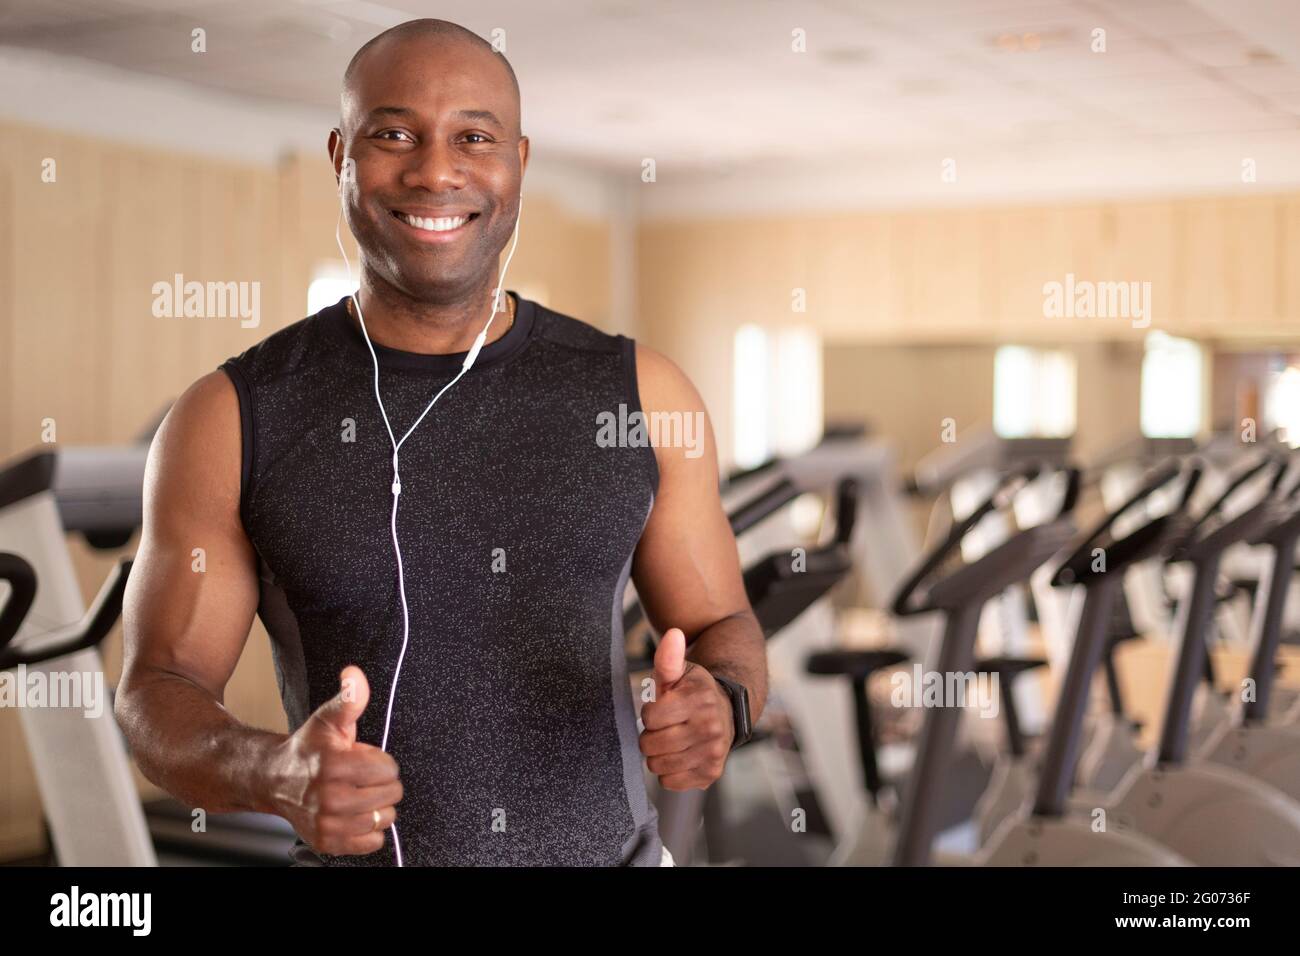 Portrait of smiling black man in fitness club. He has thumbs up in positive attitude. Concept of sport and healthy life. Stock Photo